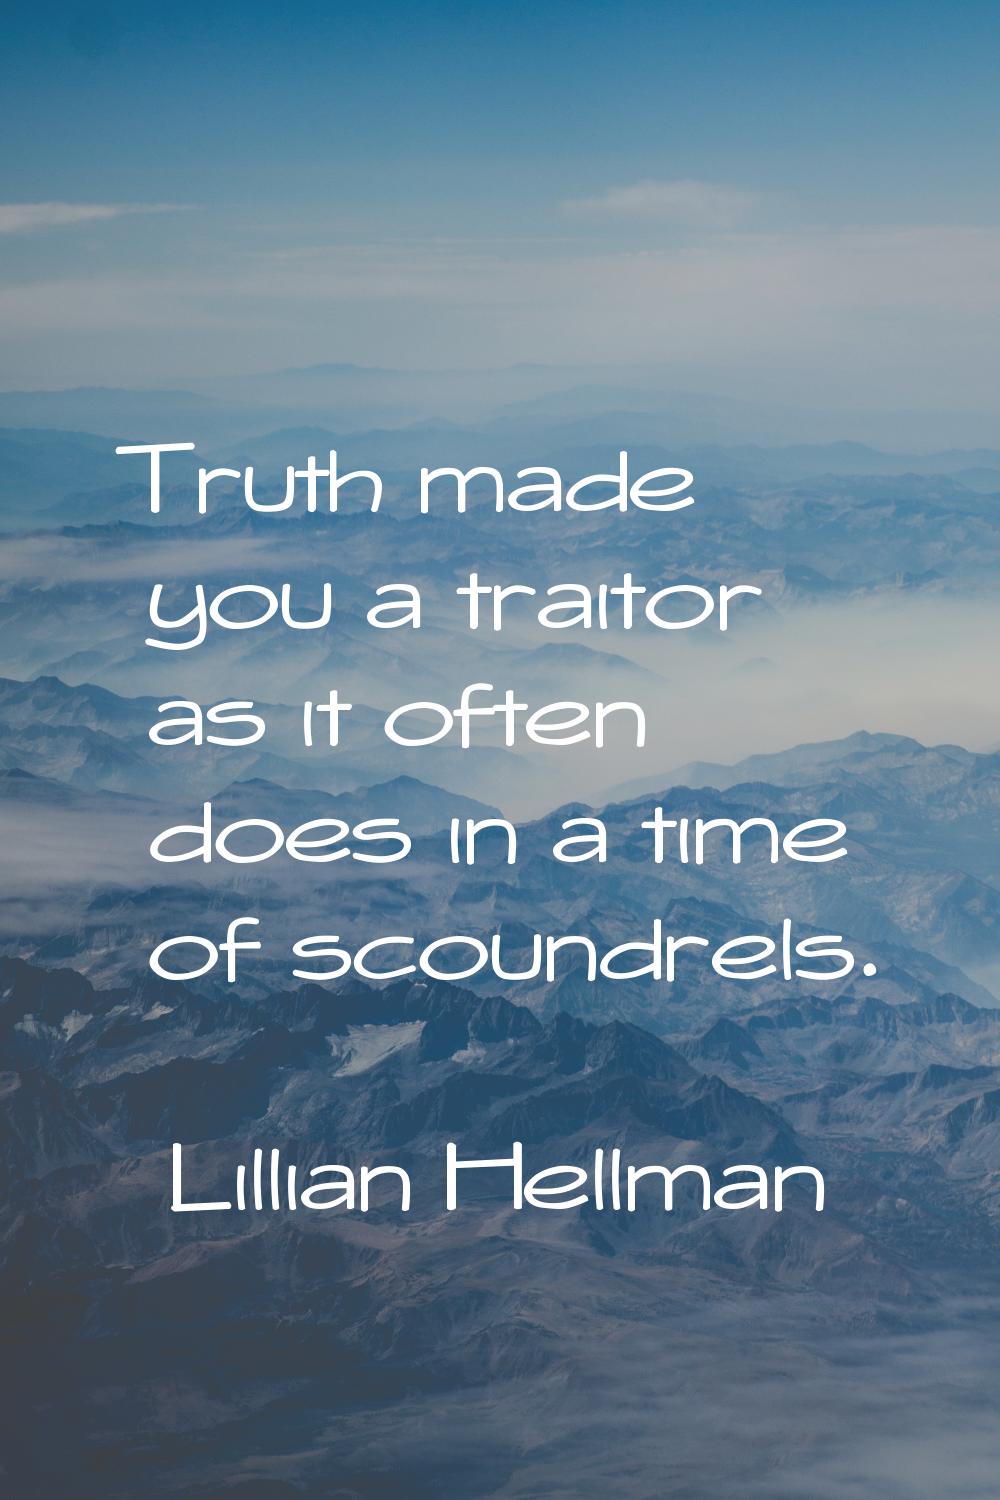 Truth made you a traitor as it often does in a time of scoundrels.